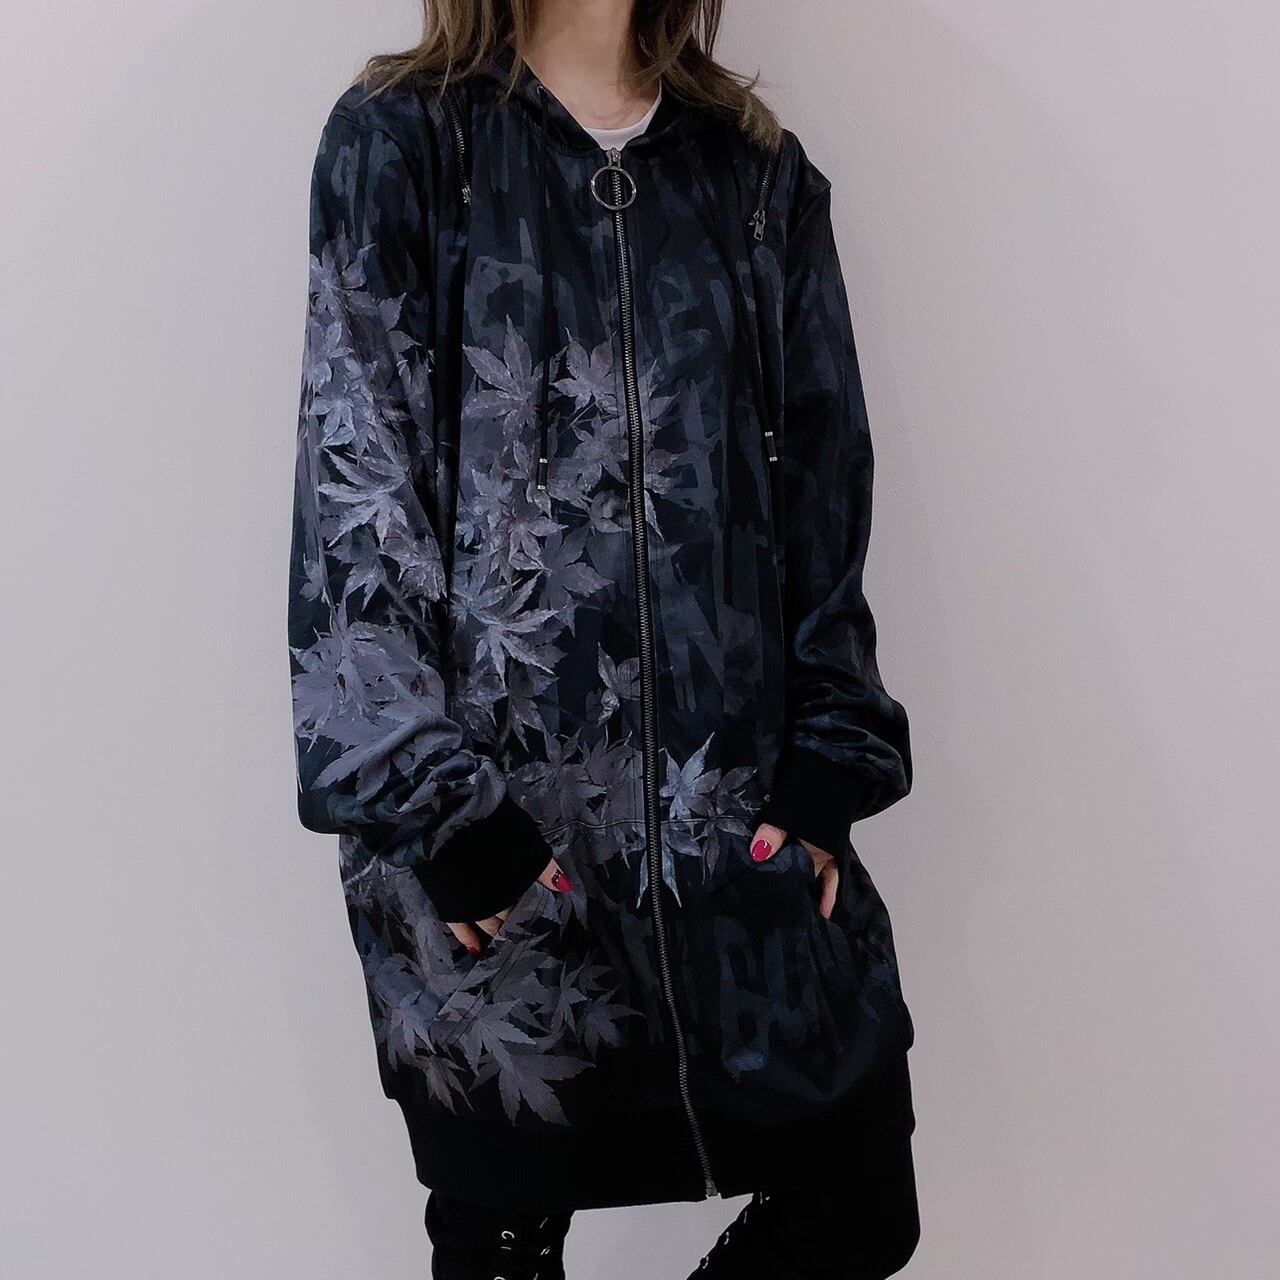 2WAY OFF-Shoulder ZIP PARKA【黒紅葉柄】 | NIER CLOTHING powered by BASE